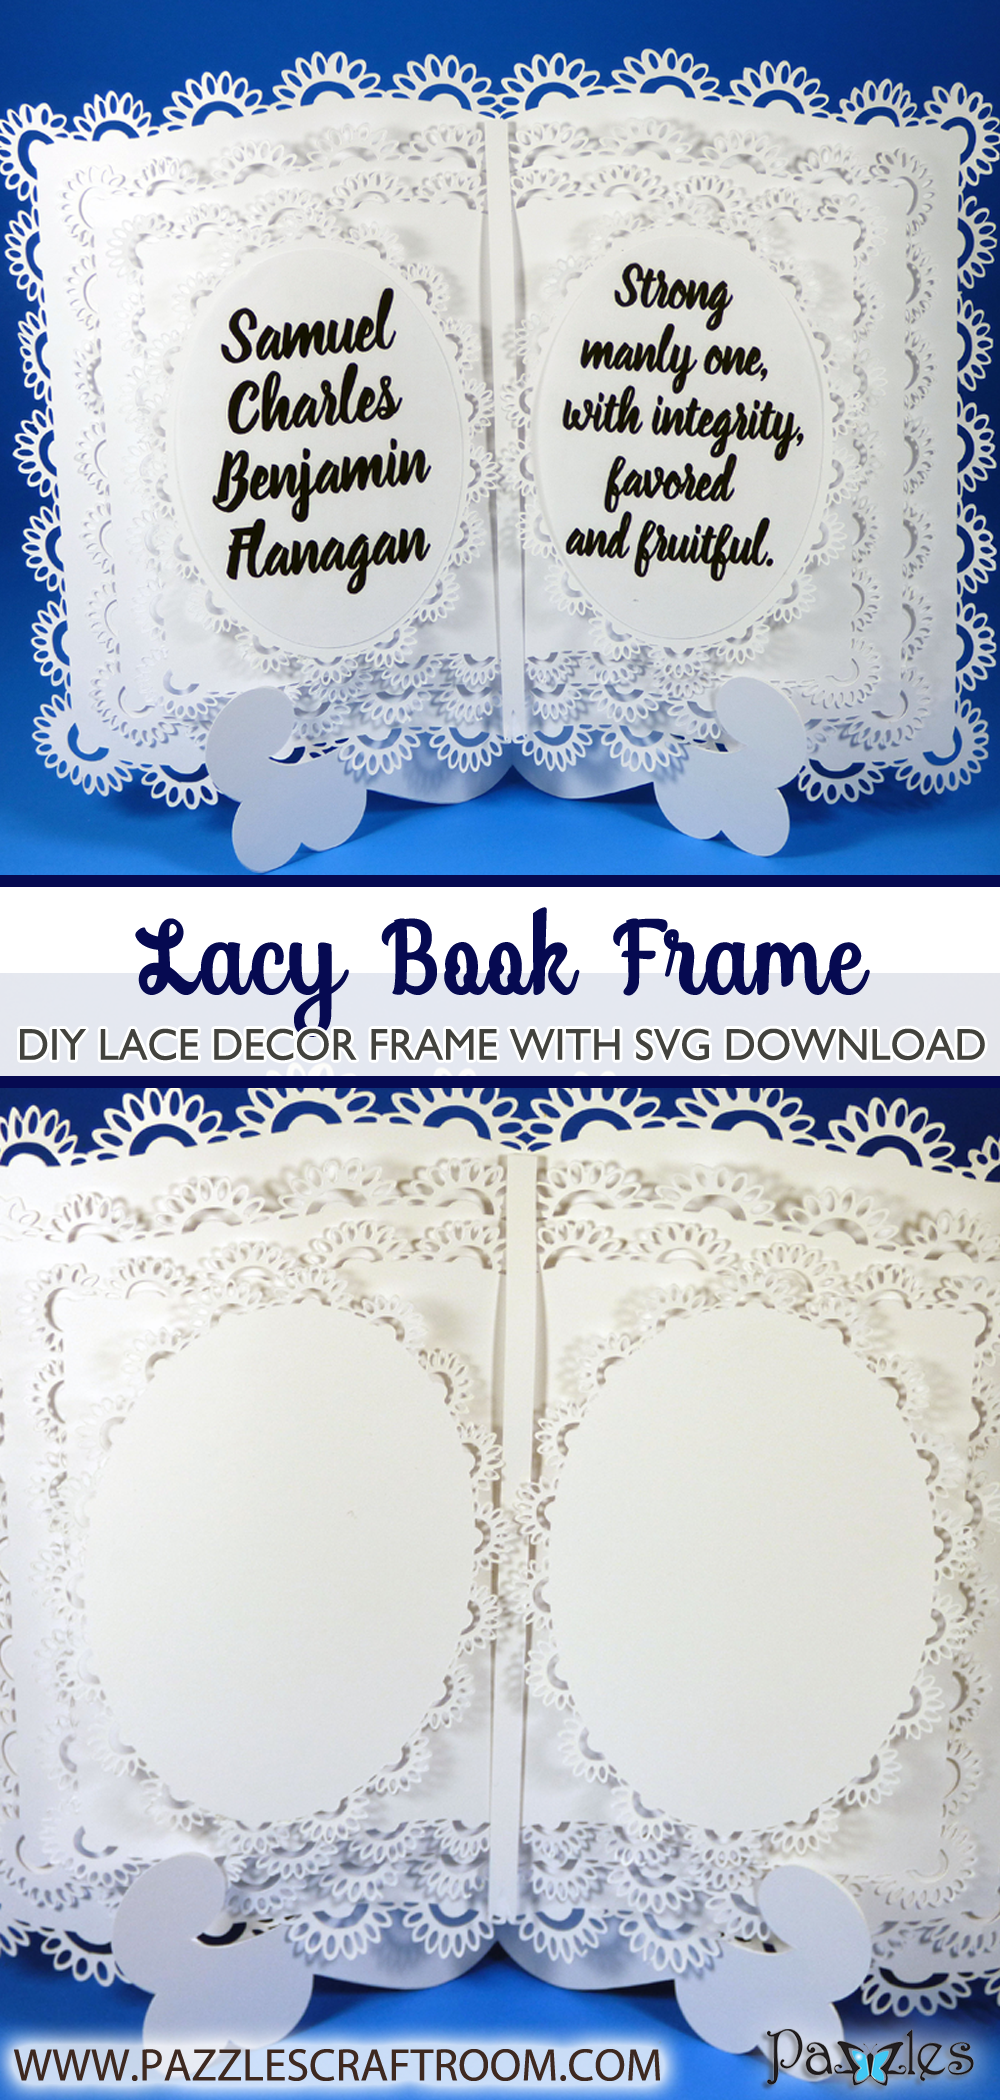 Pazzles DIY Lacy Book Frame and Easel with instant SVG download. Compatible with all major electronic cutters including Pazzles Inspiration, Cricut, and Silhouette Cameo. Design by Julie Flanagan.